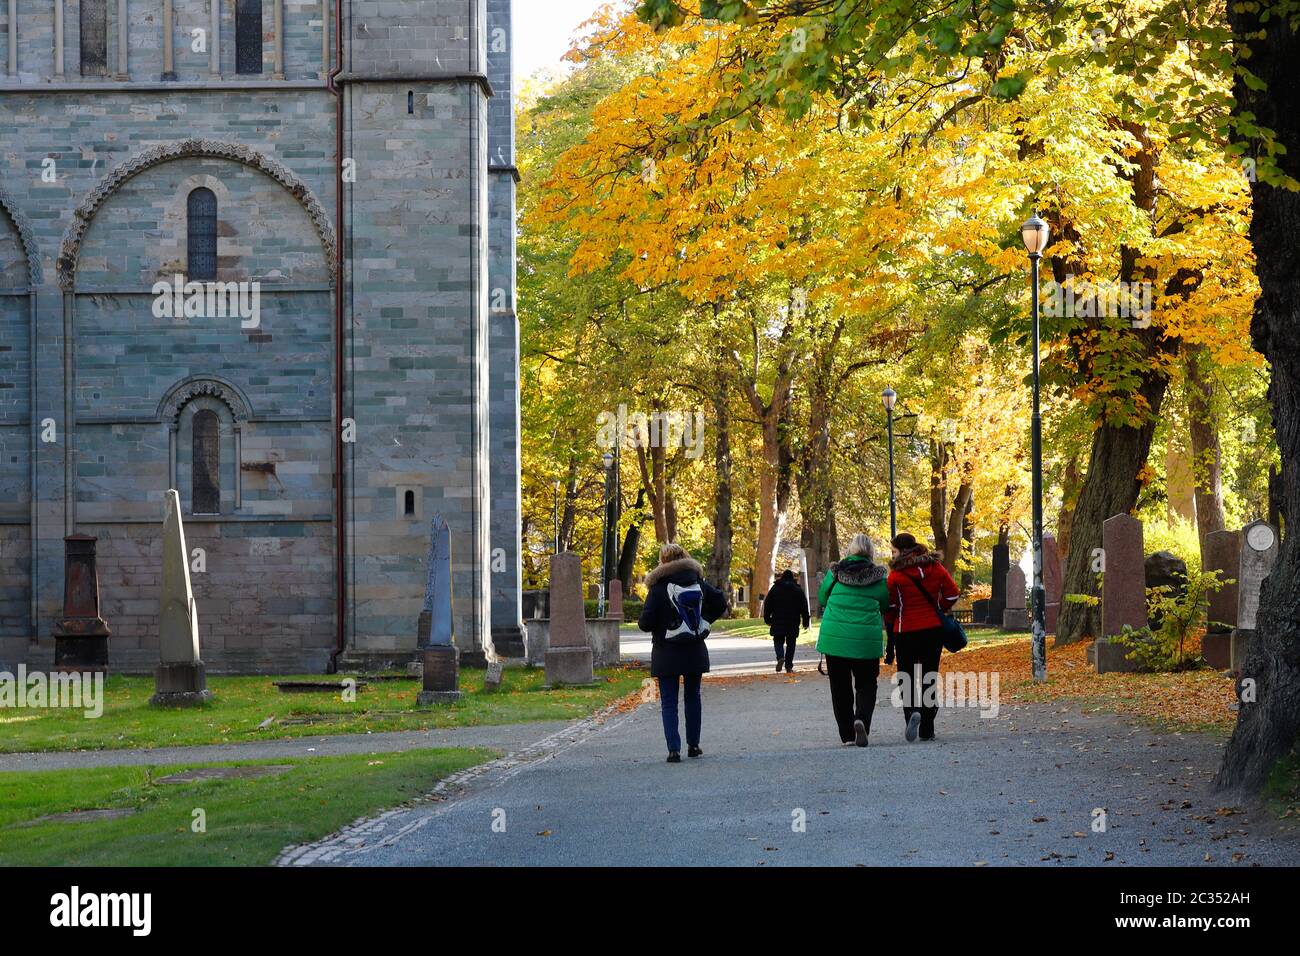 Trondheim, Norway - October 14, 2019: People walking the churchyard outside the Nidaros cathedral with trees in autumn colors. Stock Photo